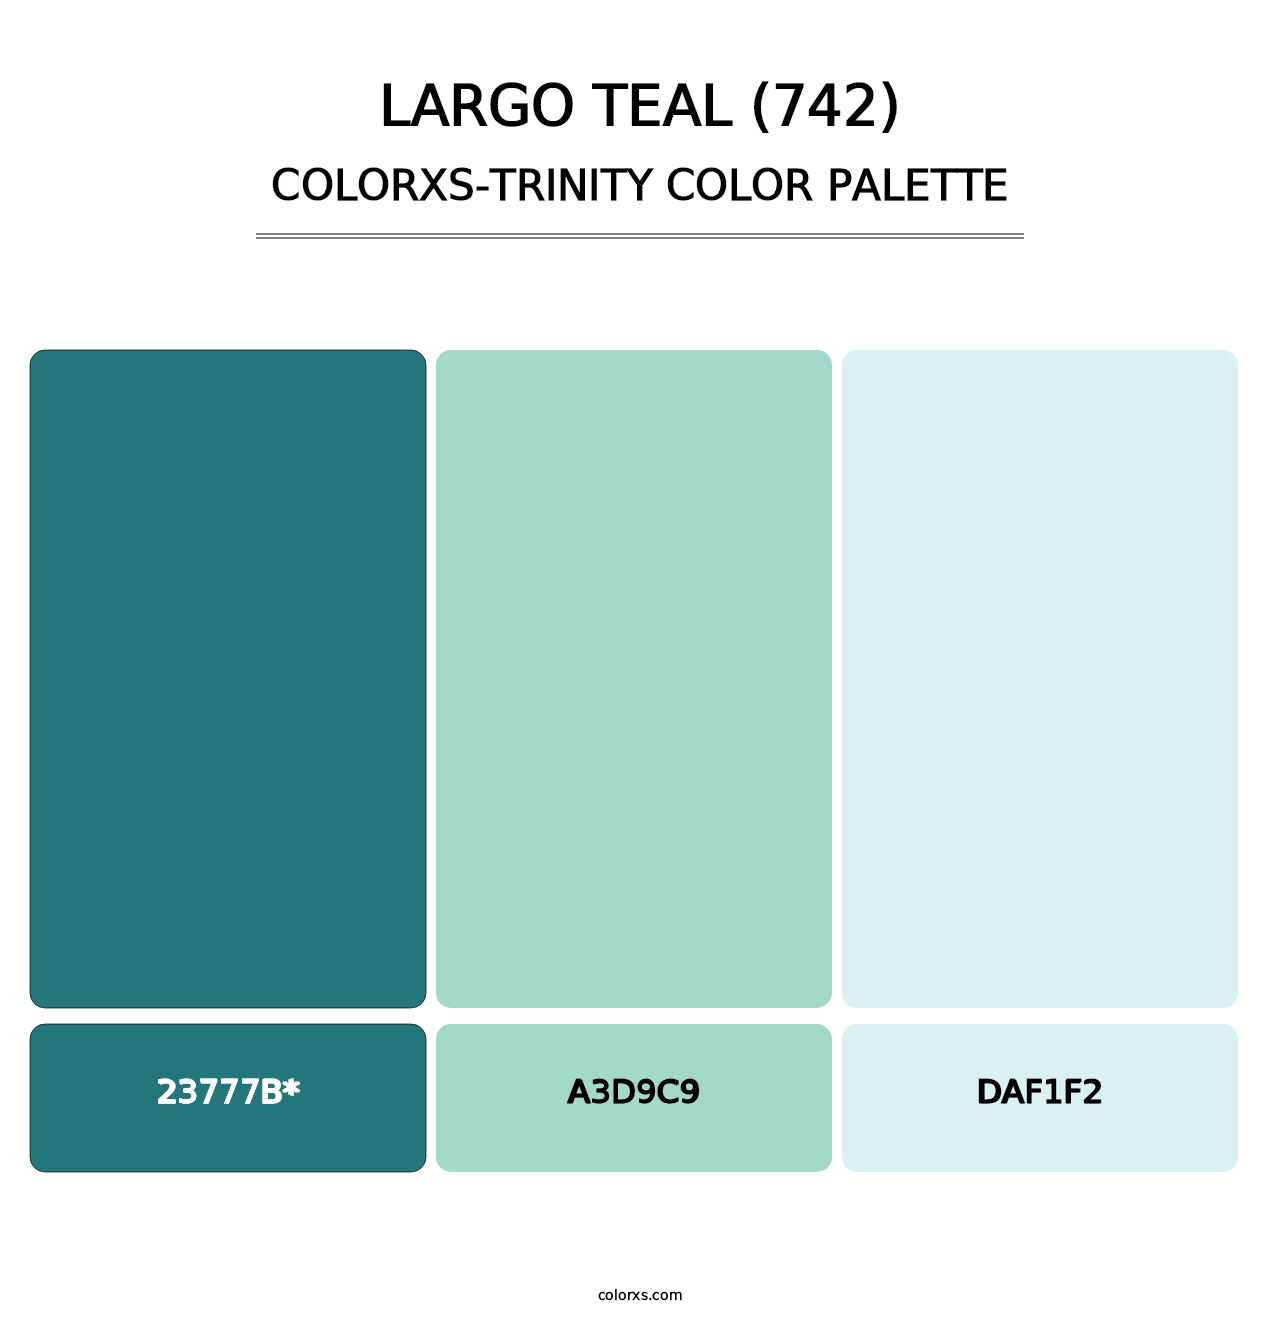 Largo Teal (742) - Colorxs Trinity Palette